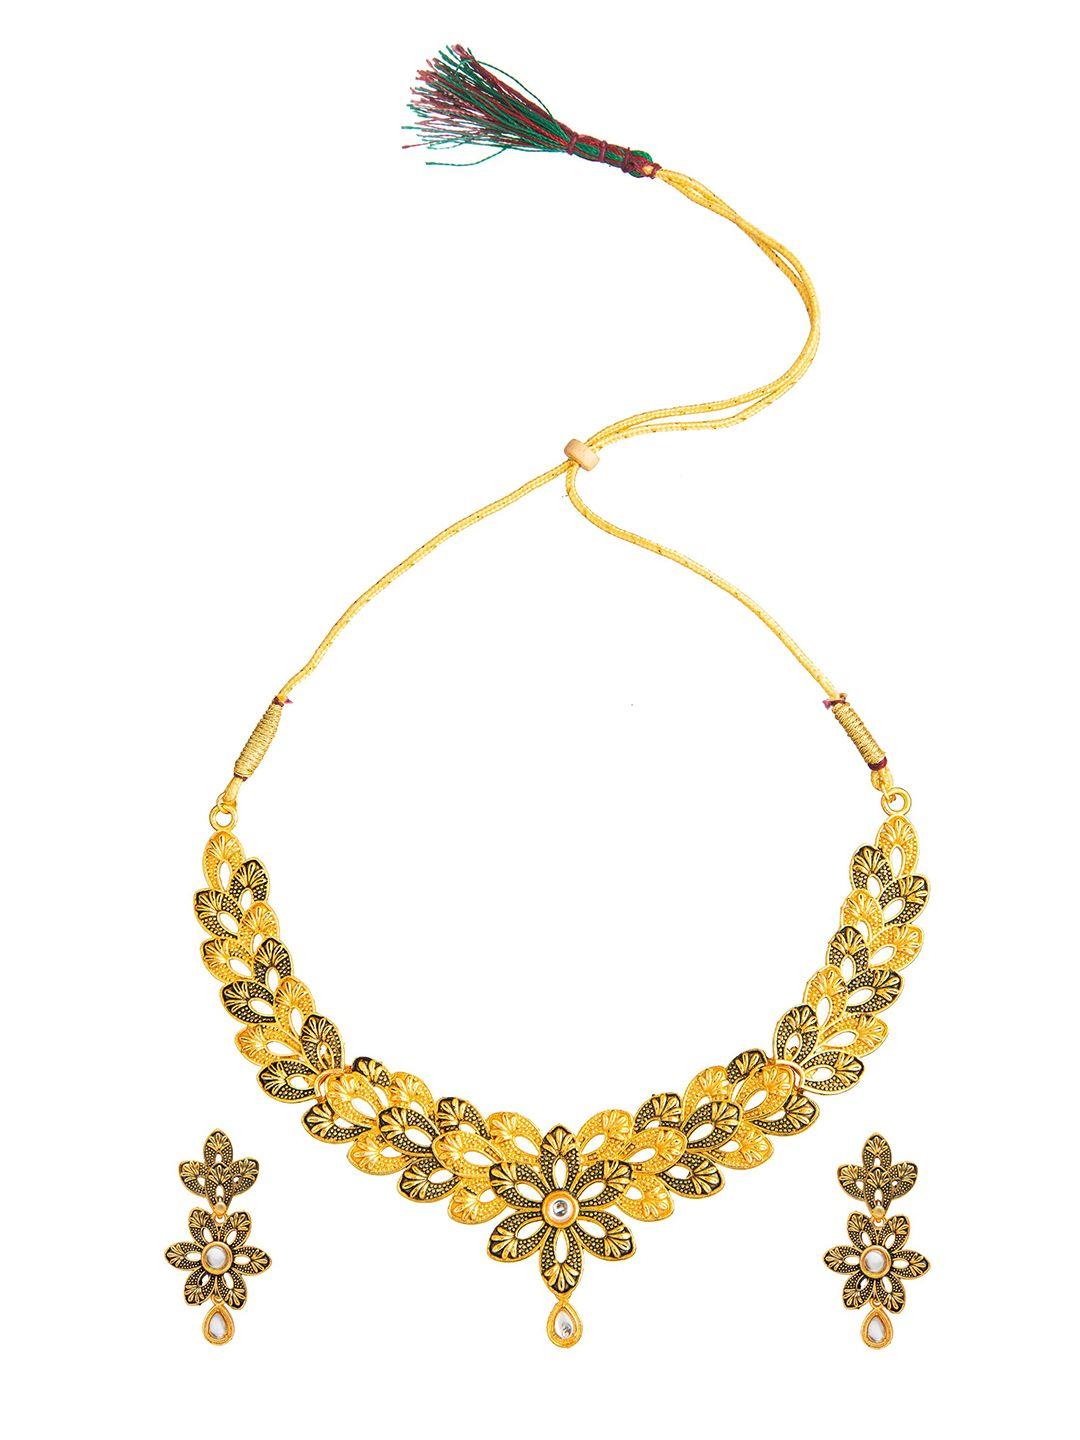 shining jewel - by shivansh gold-toned brass gold-plated handcrafted necklace